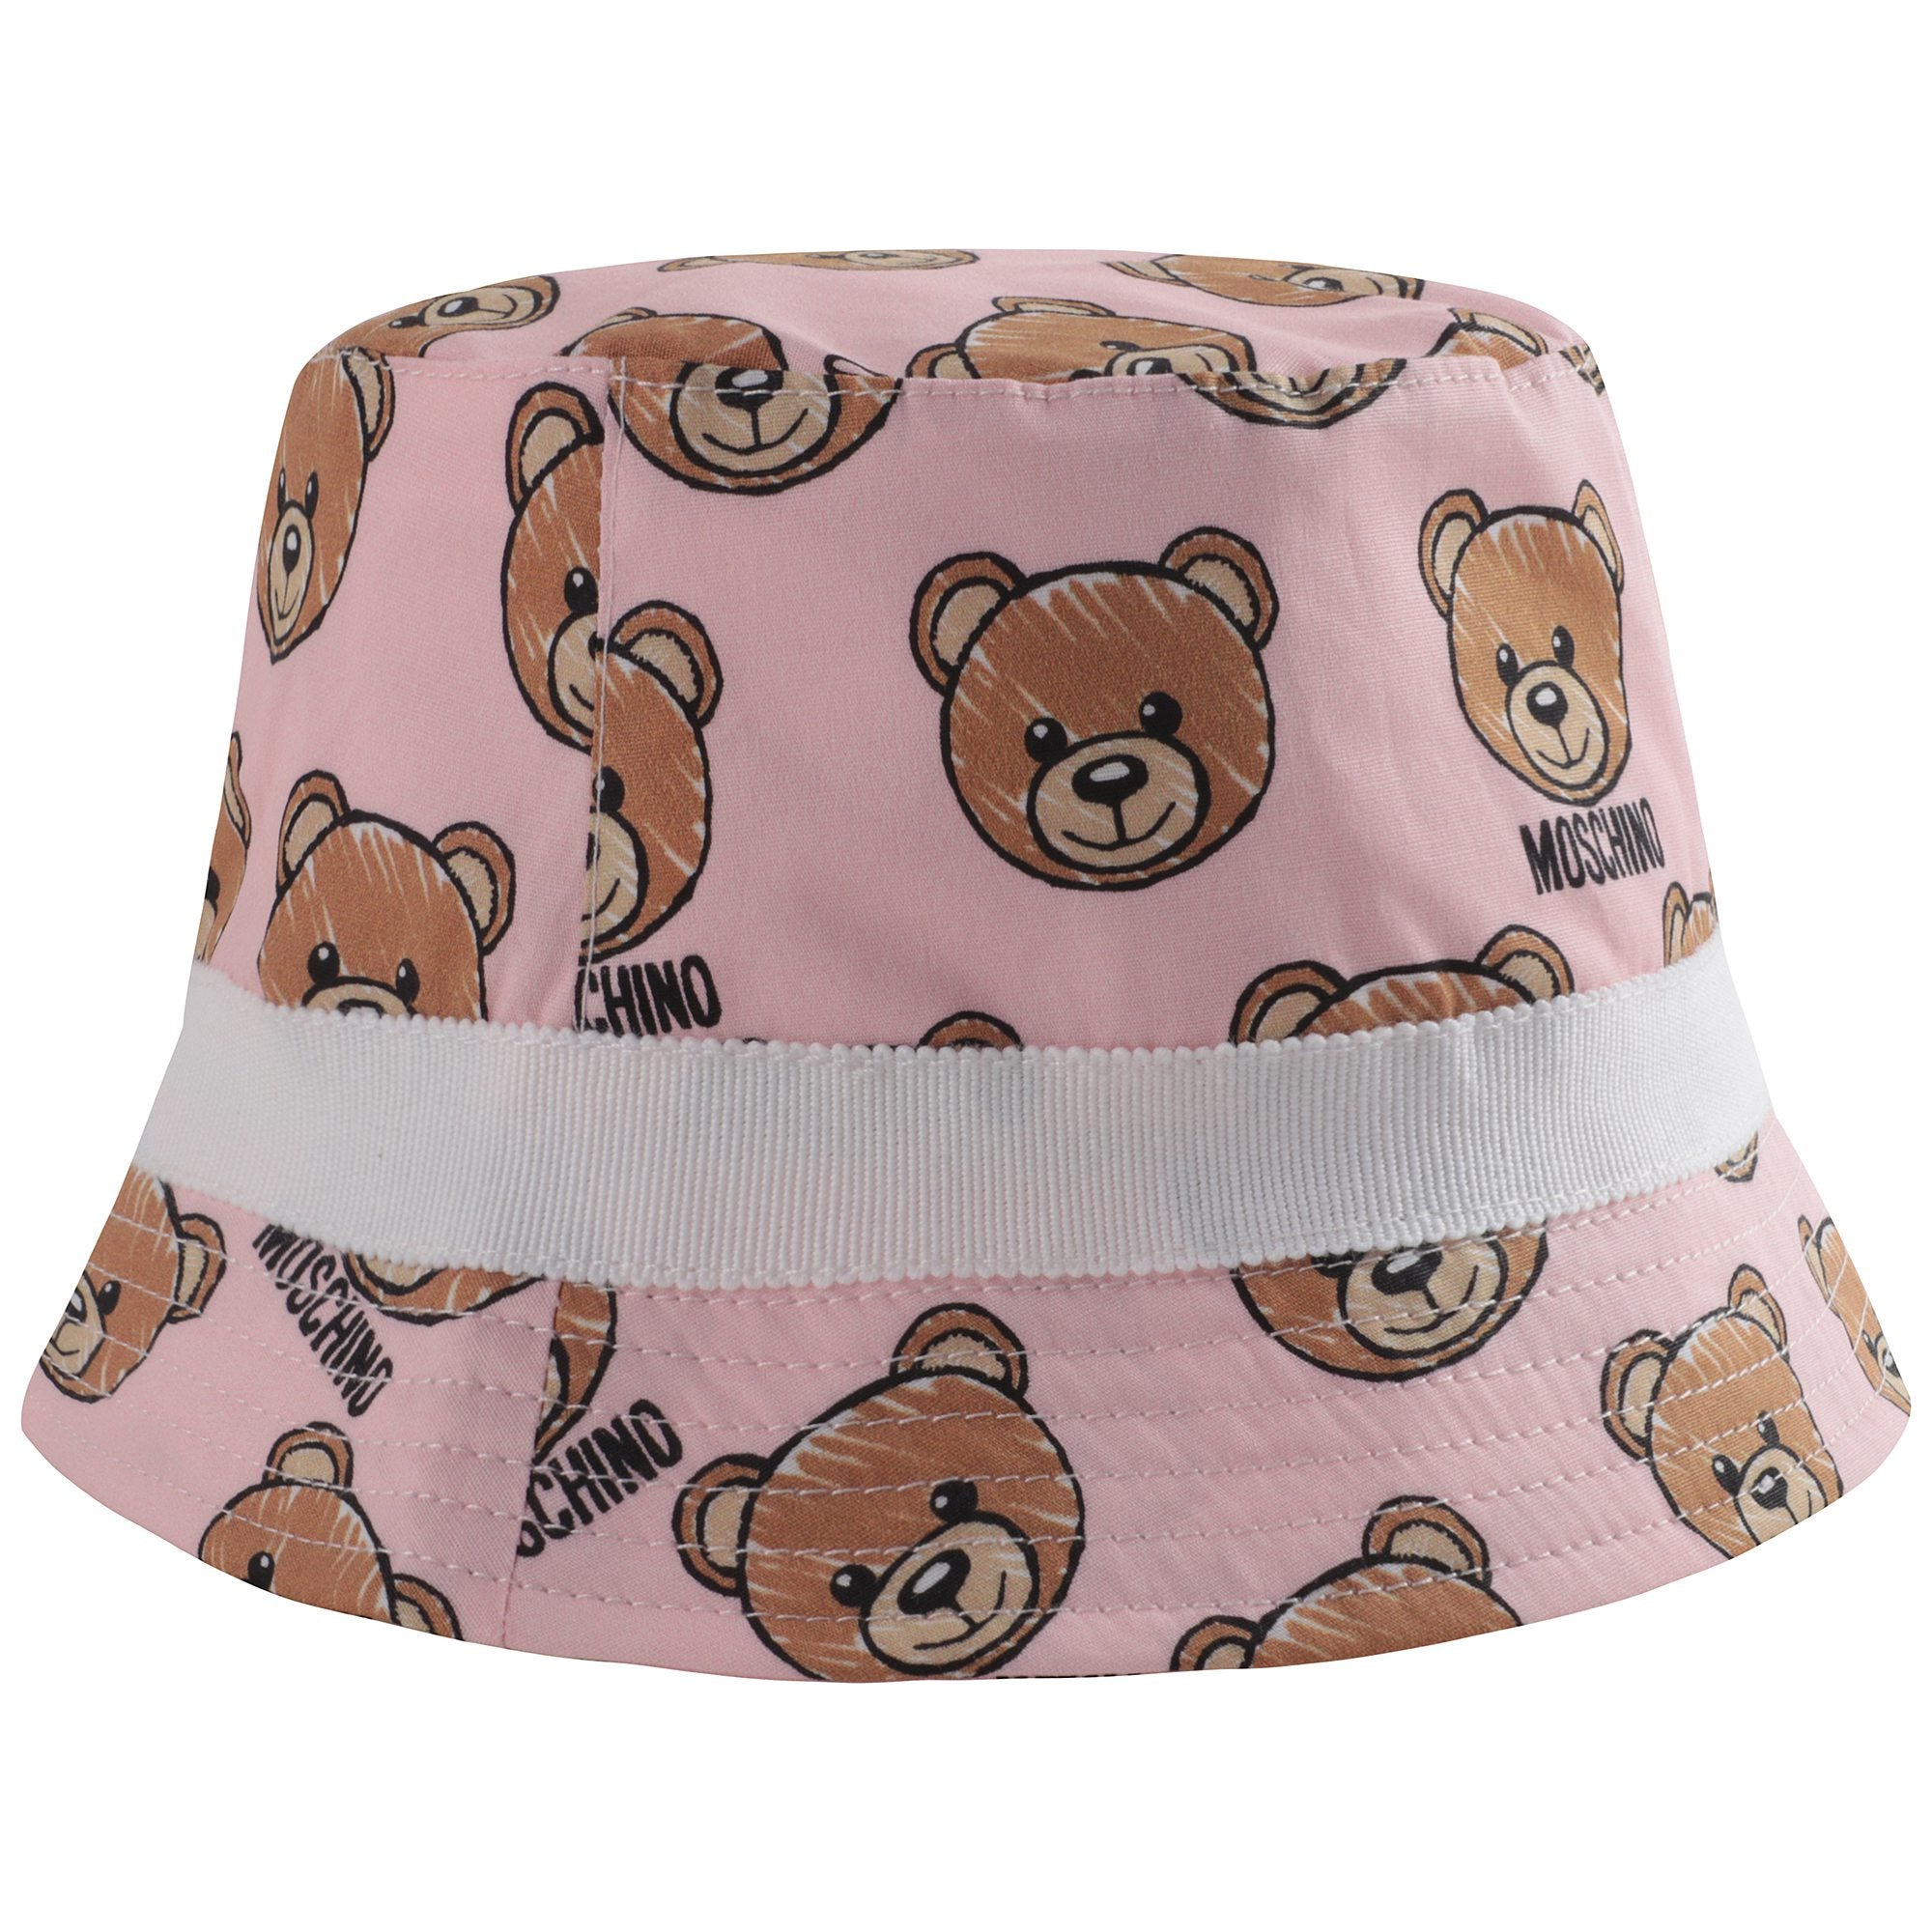 Baby Boys & Girls Pink Toy Cotton Hat